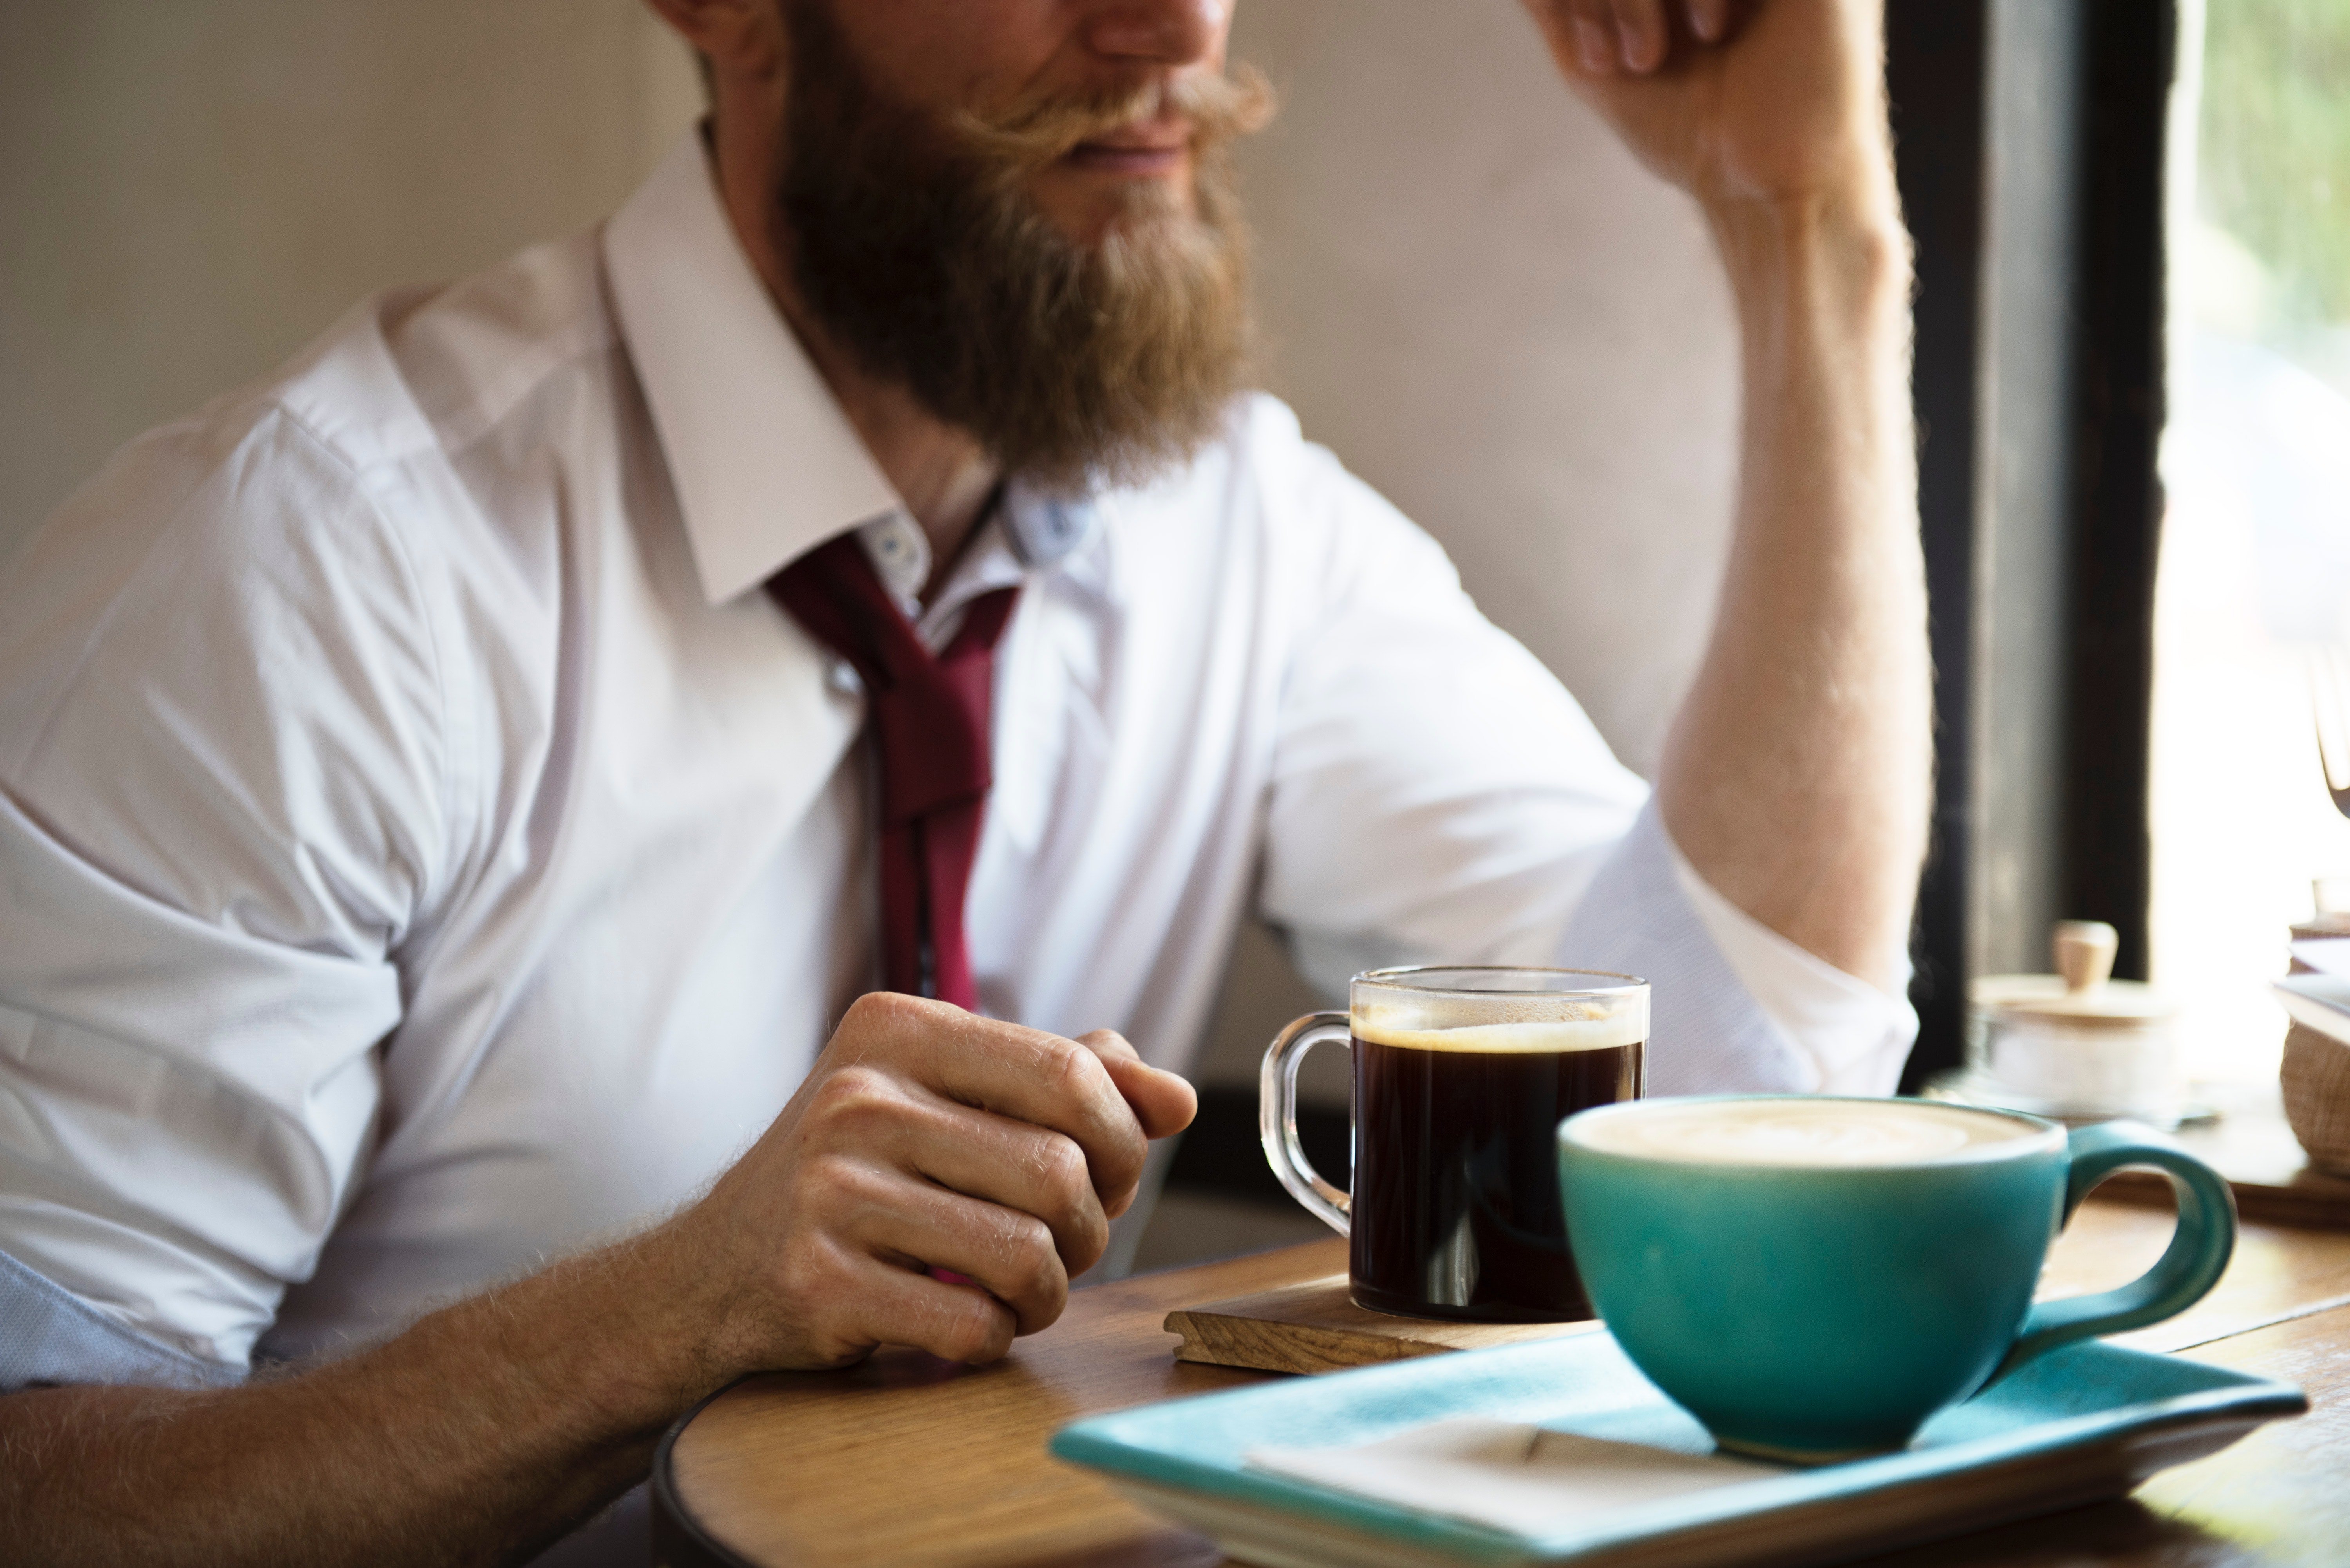 Man sitting at a table with a hot drink. | Source: rawpixel.com/Pexels